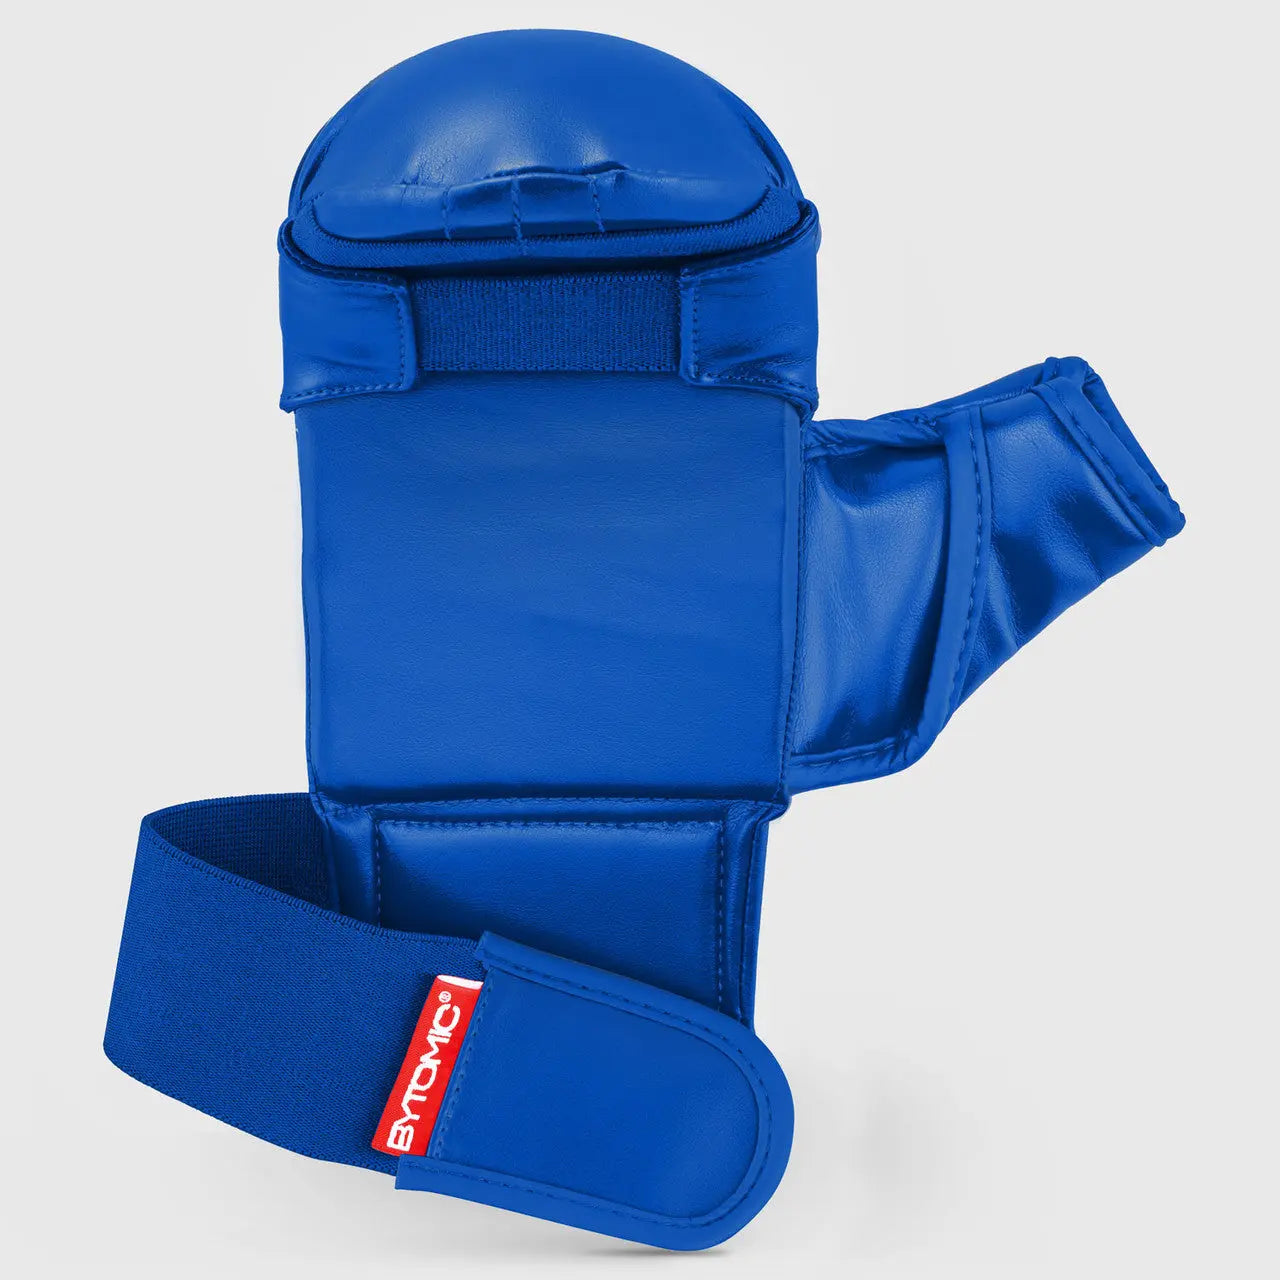 Bytomic Red Label Karate Mitt with Thumb - Bytomic